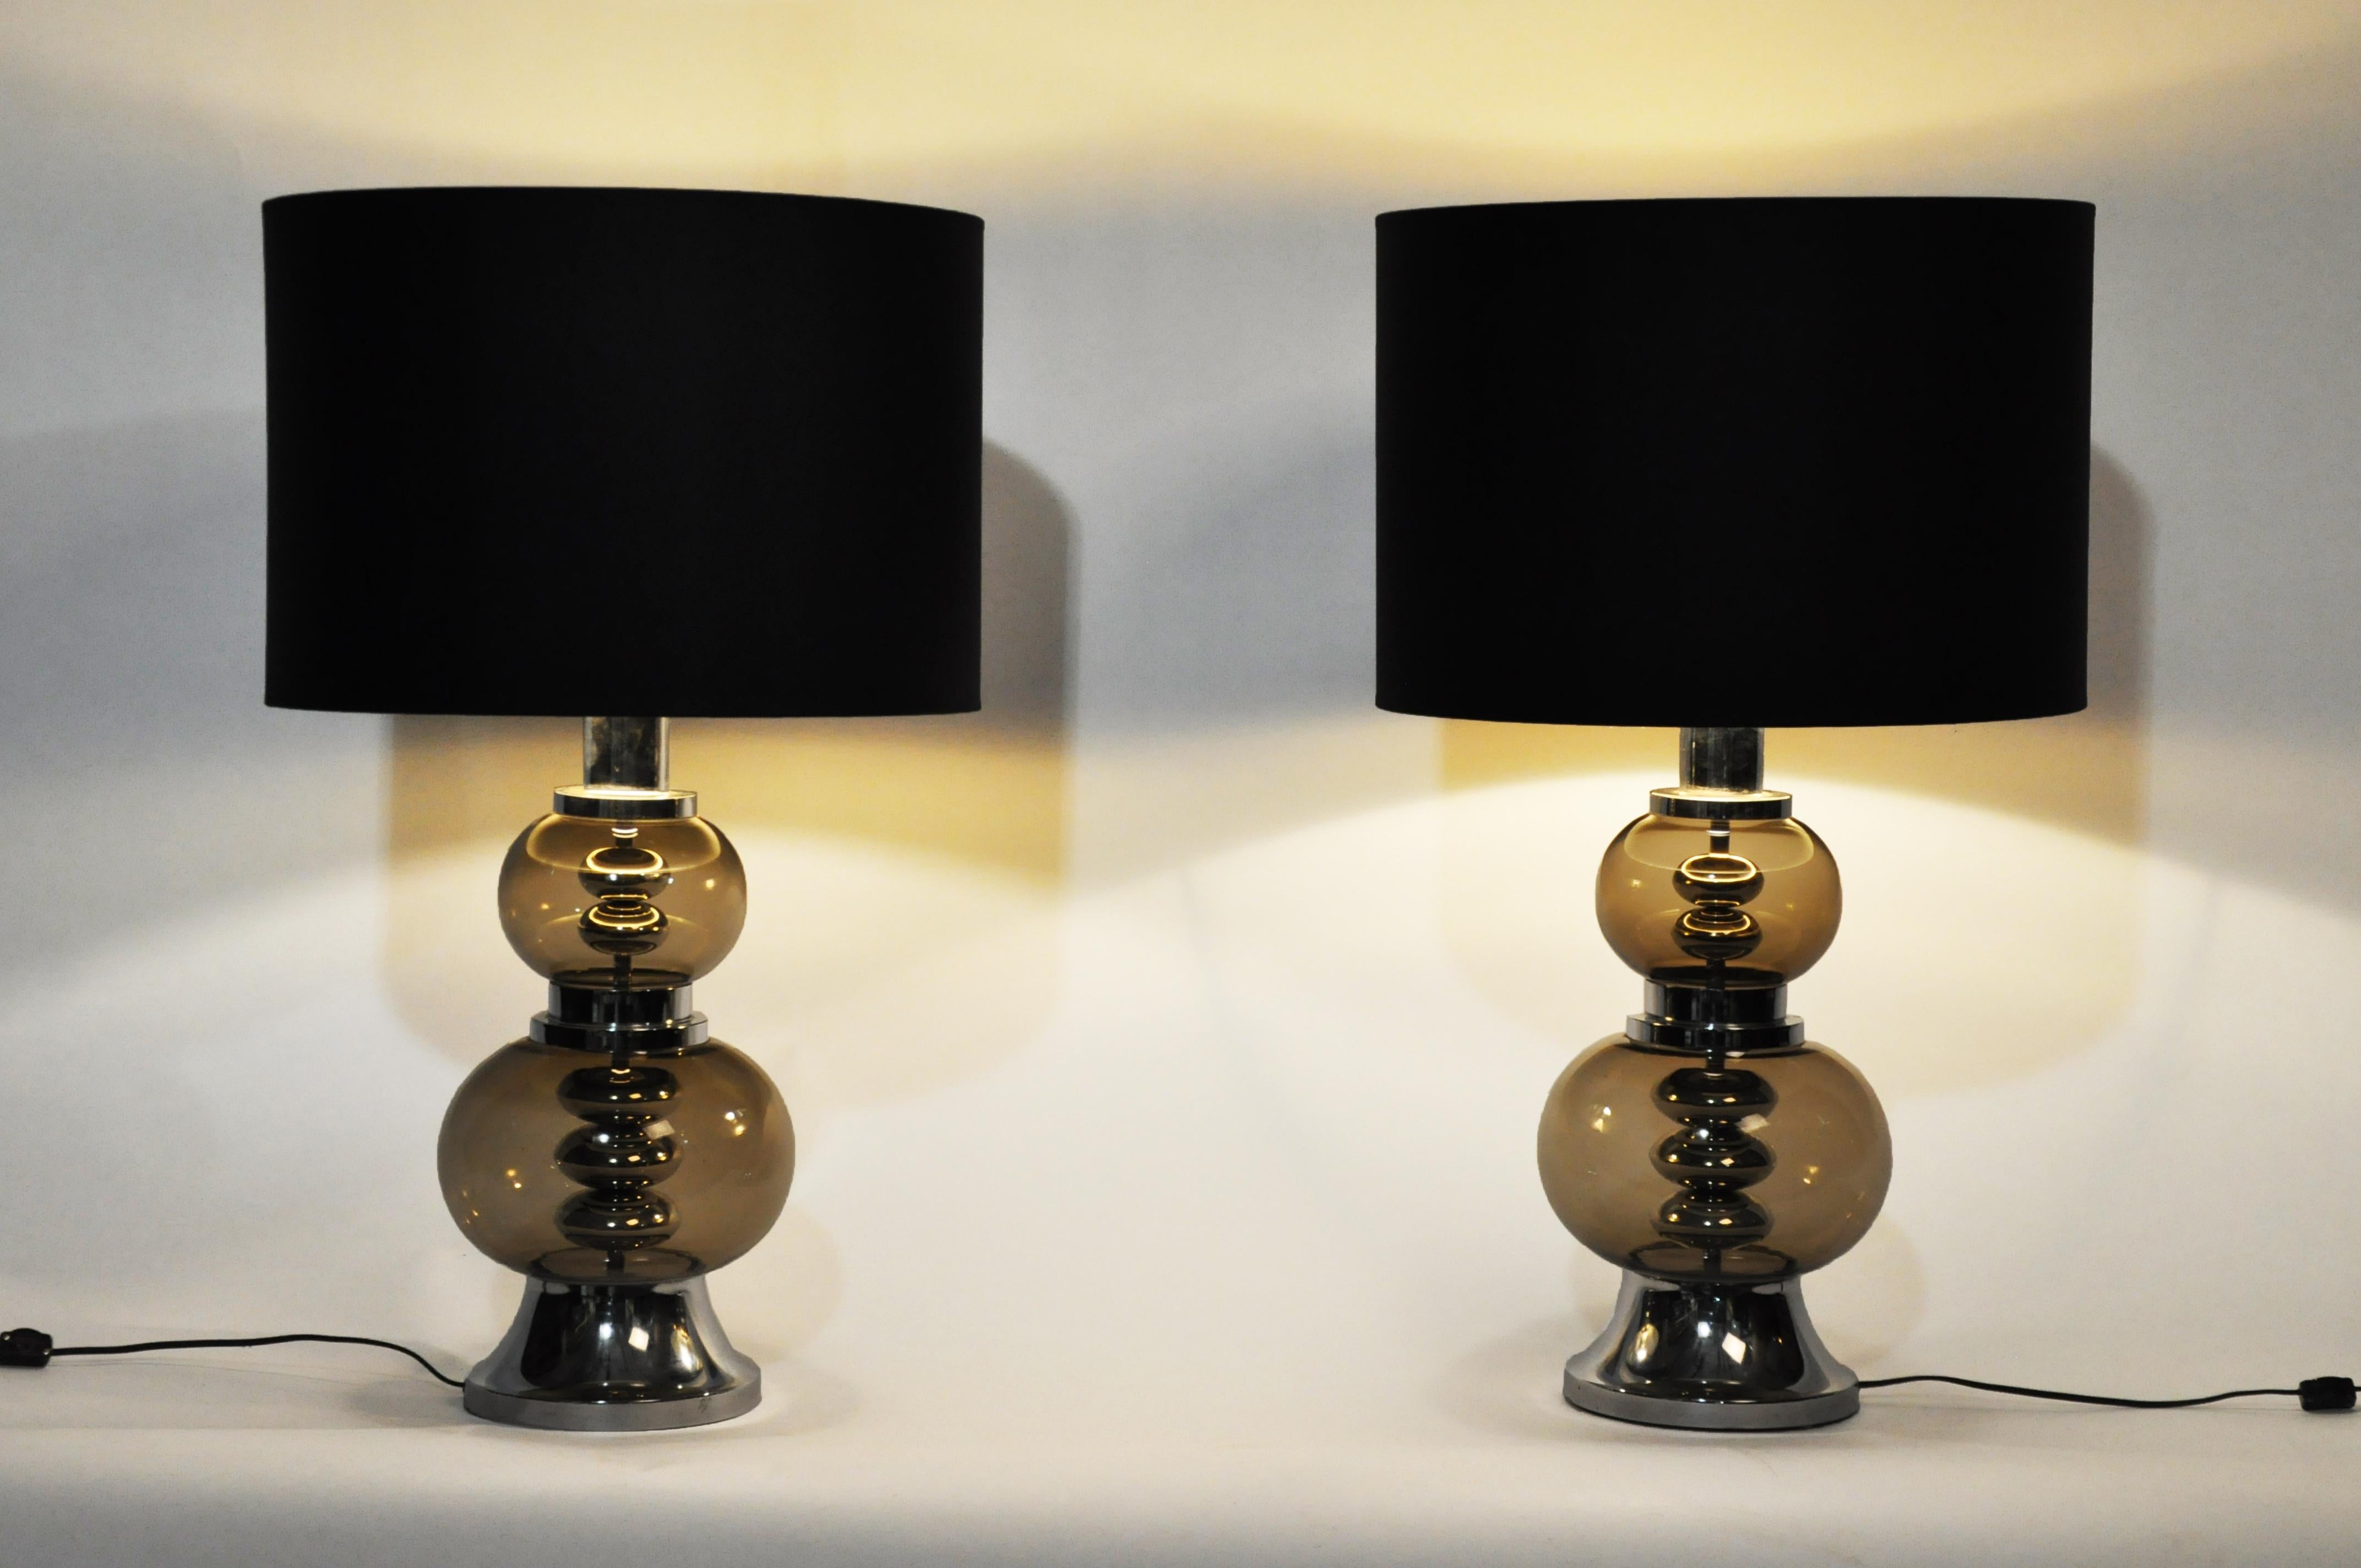 Pair of elegant glass lamps from France, circa 1970; rewired for U.S. electrical systems.